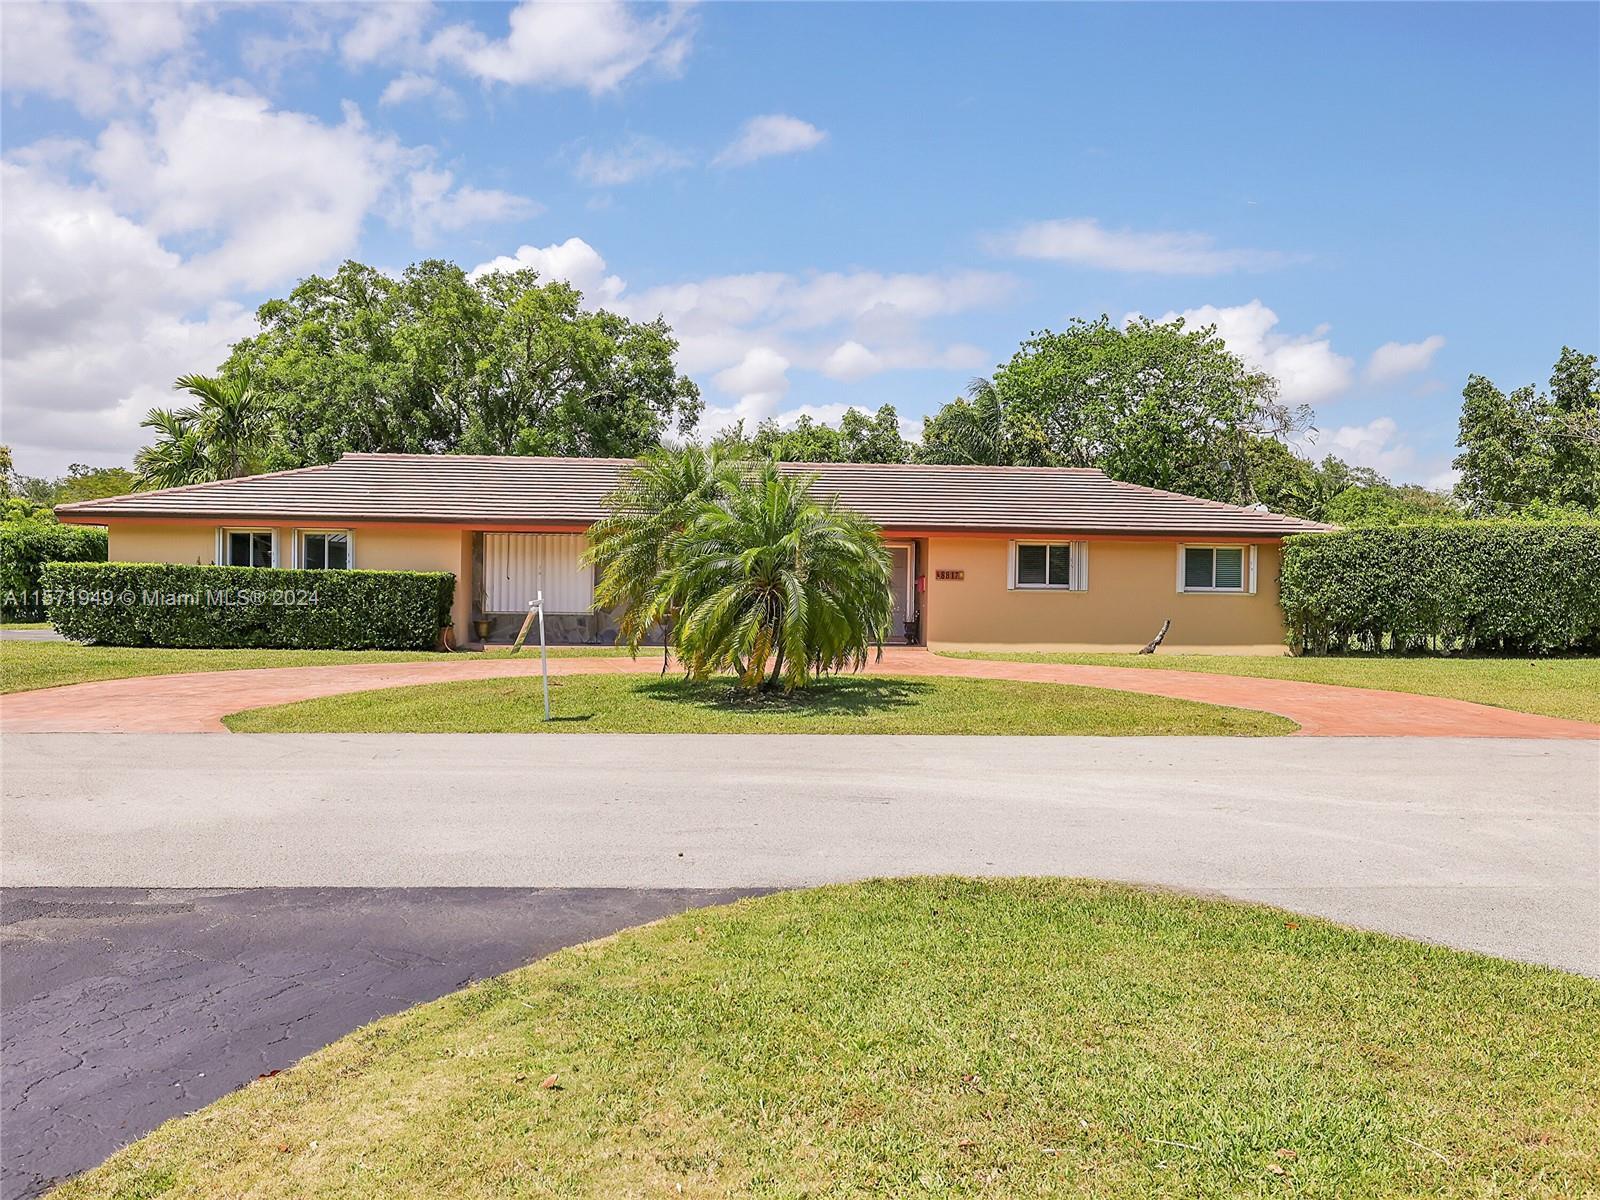 This single-family home in Palmetto Bay will soon be on the market. Situated in a very quiet and pea